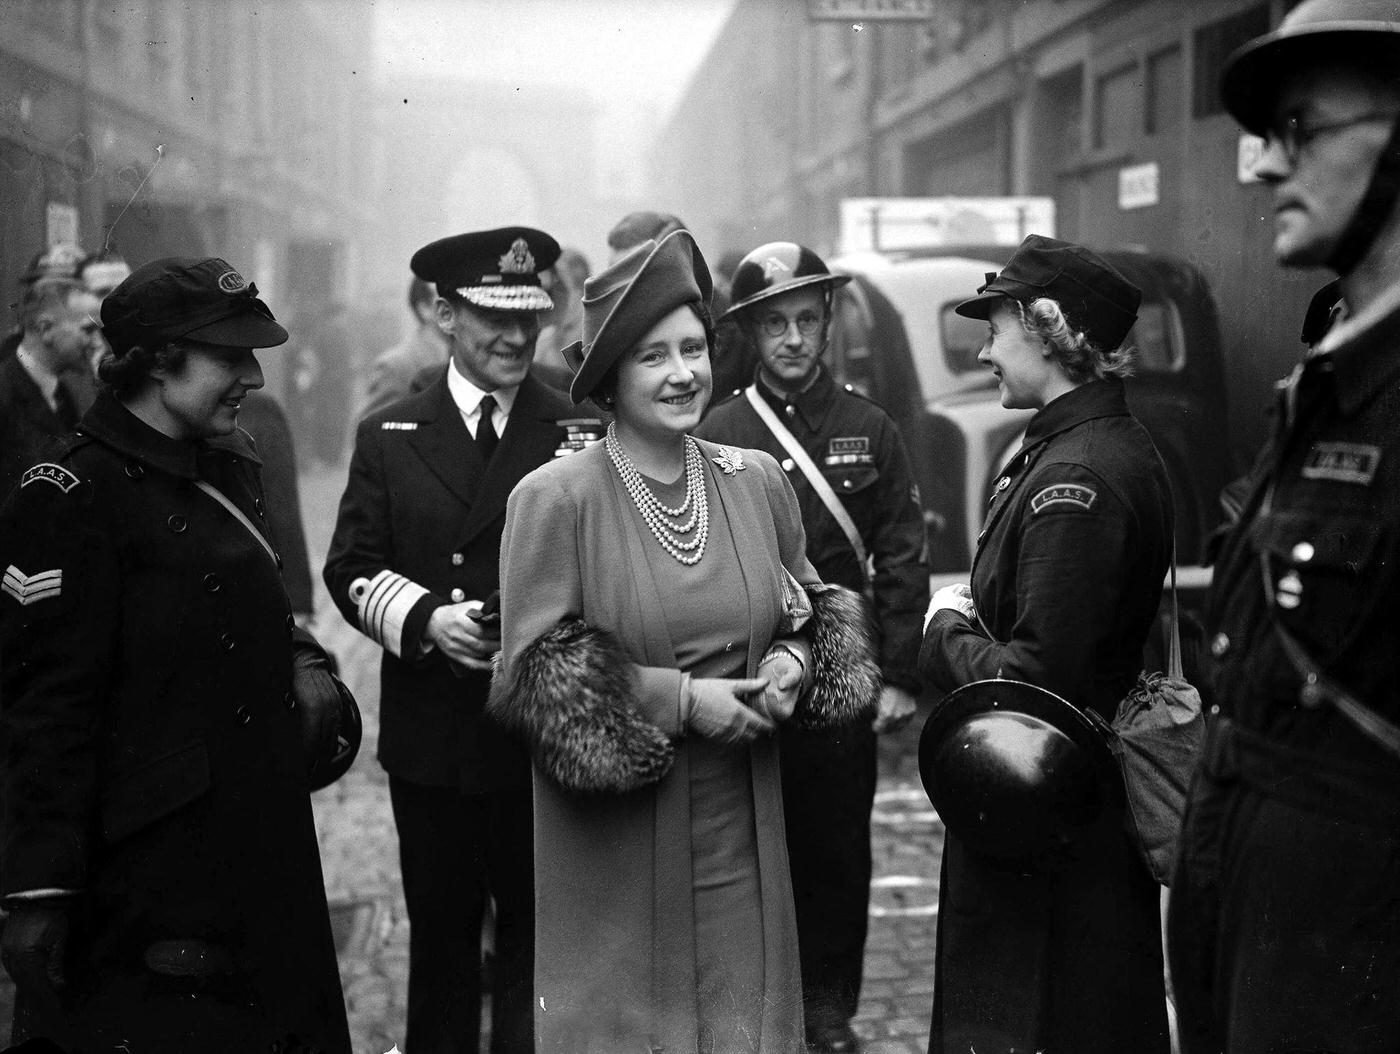 Queen Elizabeth chatting with a woman ambulance driver during her tour of inspection of Ambulance Air Raid Precautions (ARP) depots in London during the Blitz, London, 1940